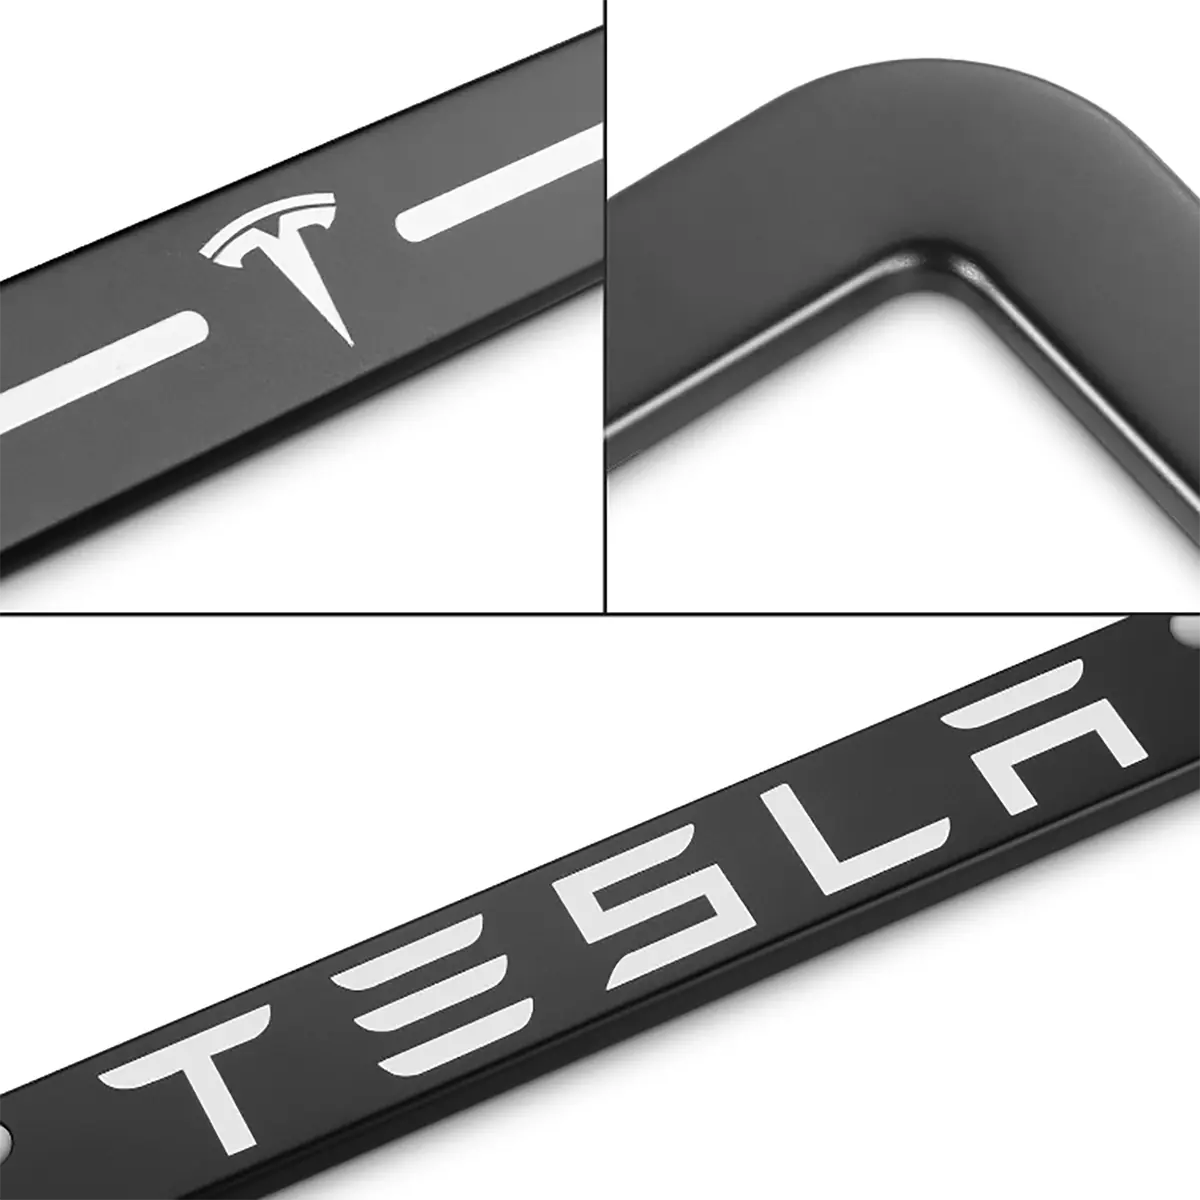 Protect Your Tesla's License Plate in Style with the Adreama License Plate Frame Cover